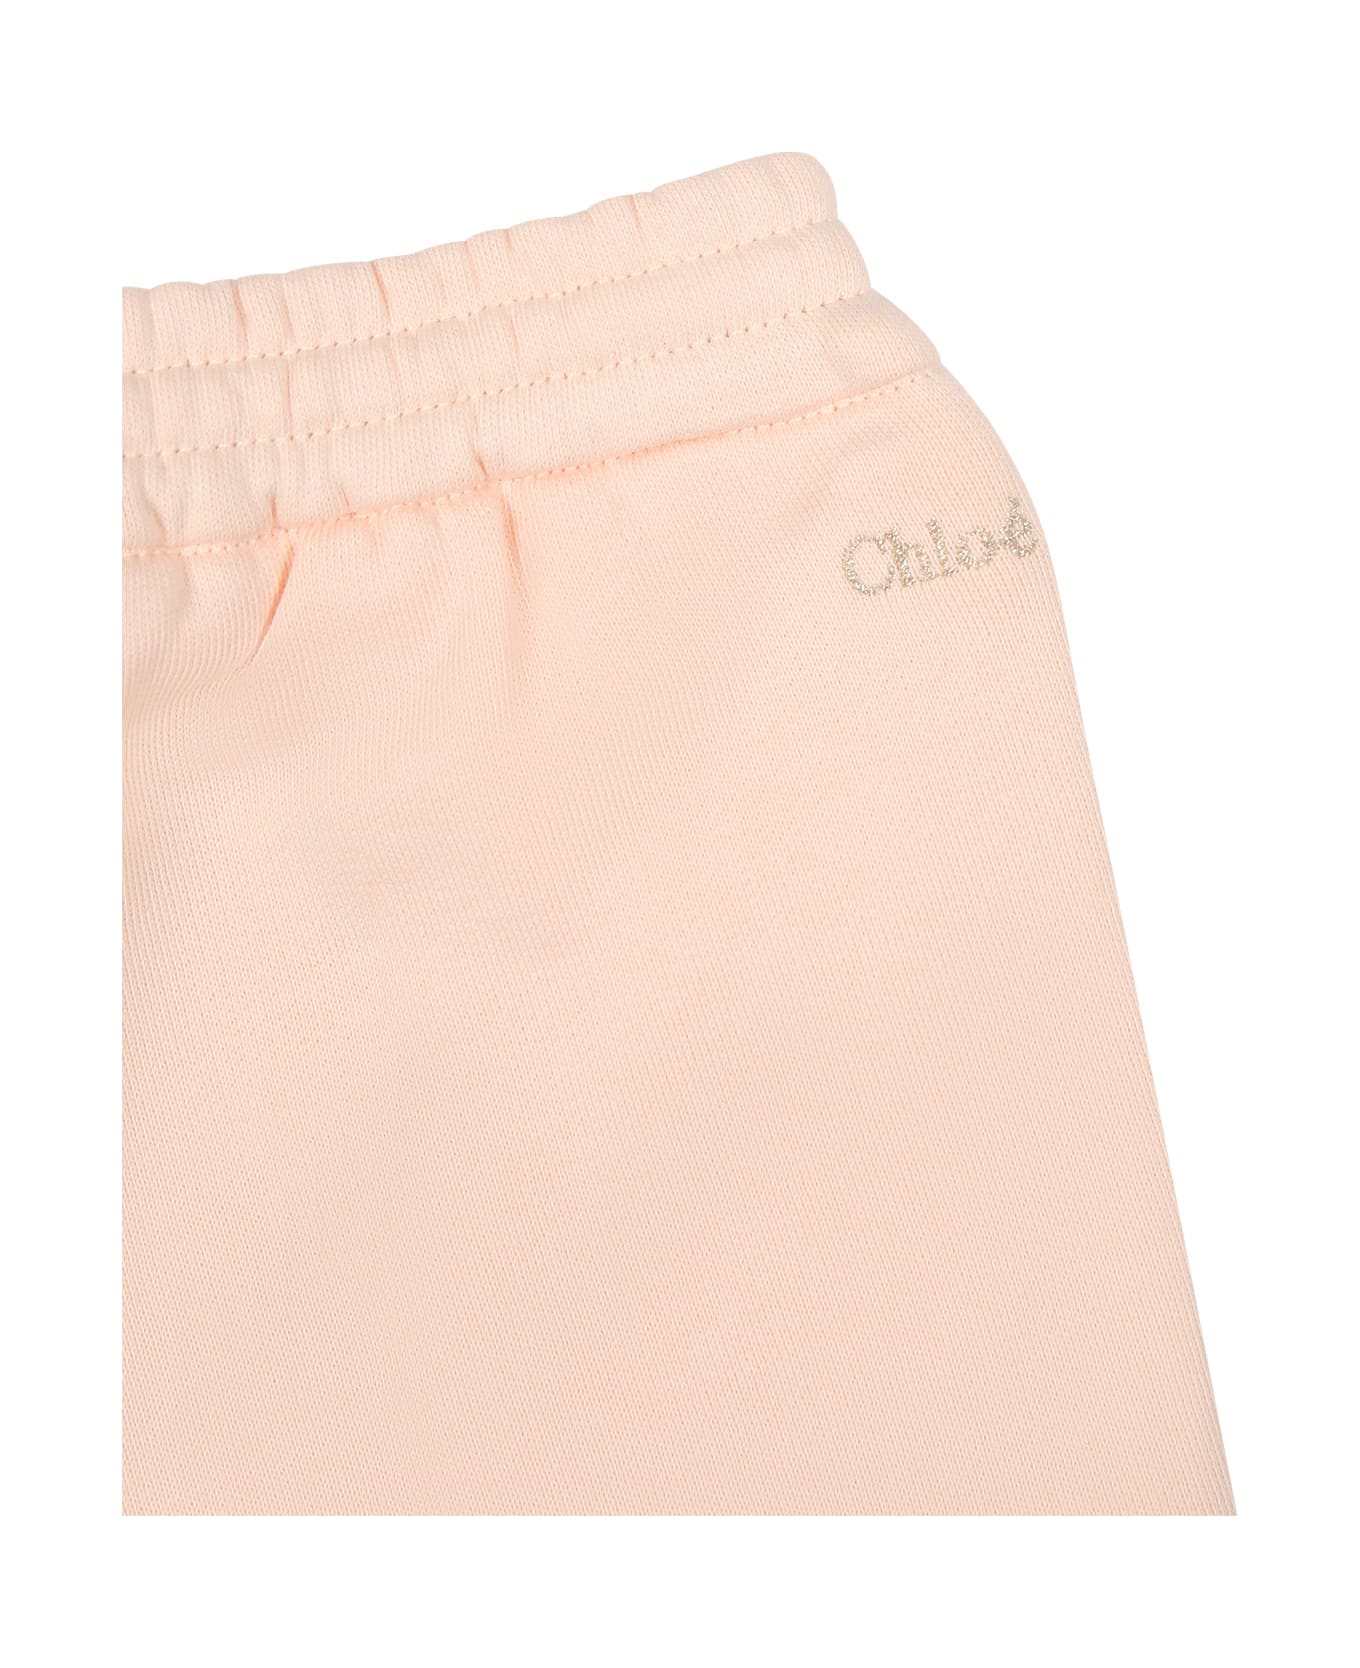 Chloé Pink Casual Chopova Trousers For Baby Gilr With Logo - Pink